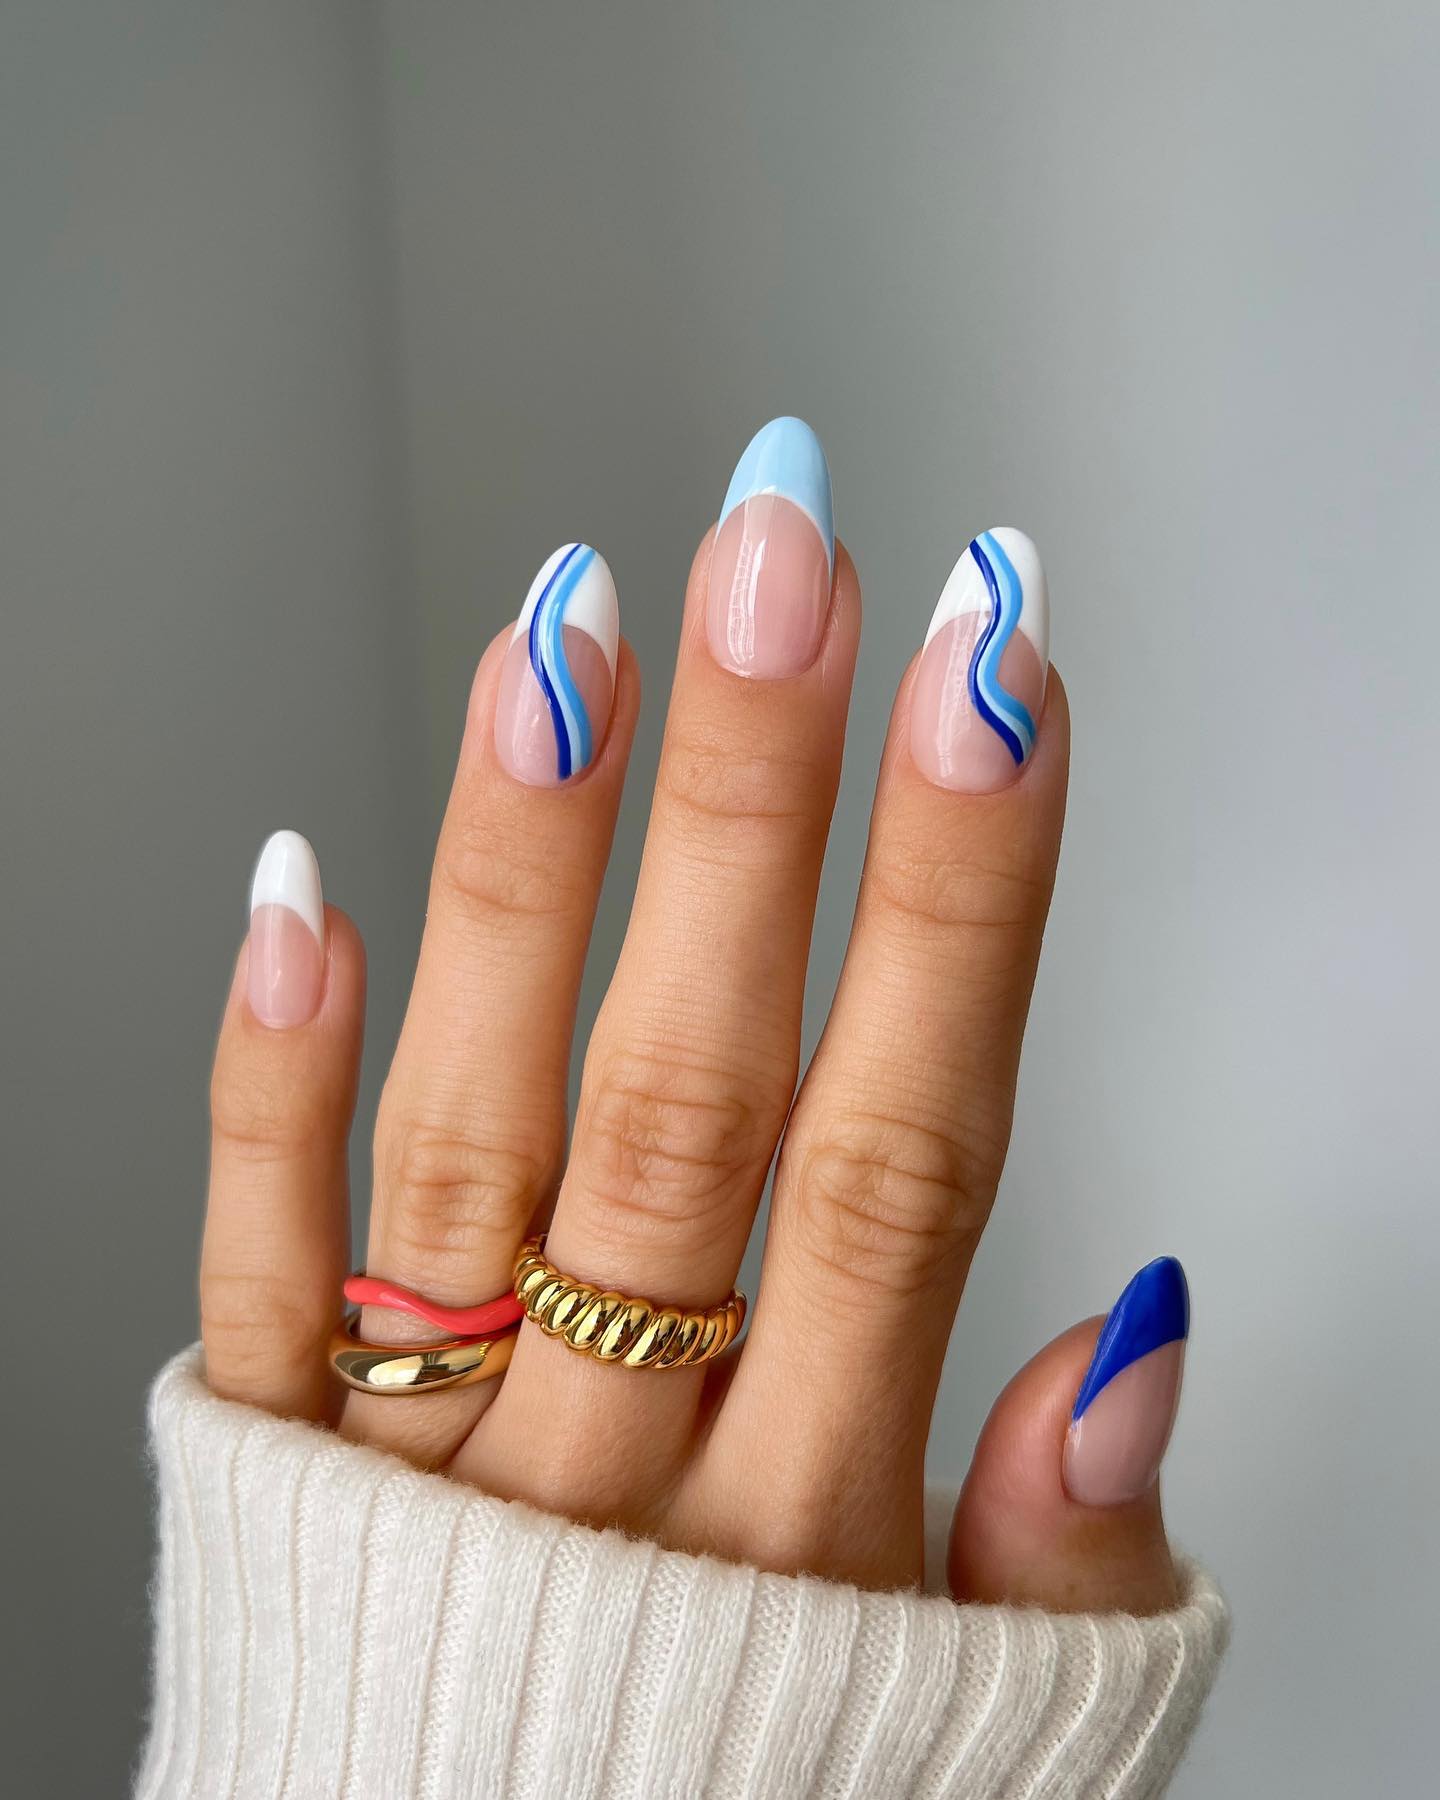 A simple pop of blue in a form of nail art is for women who like elegant nails, but with that ultimate wave/summer shade.